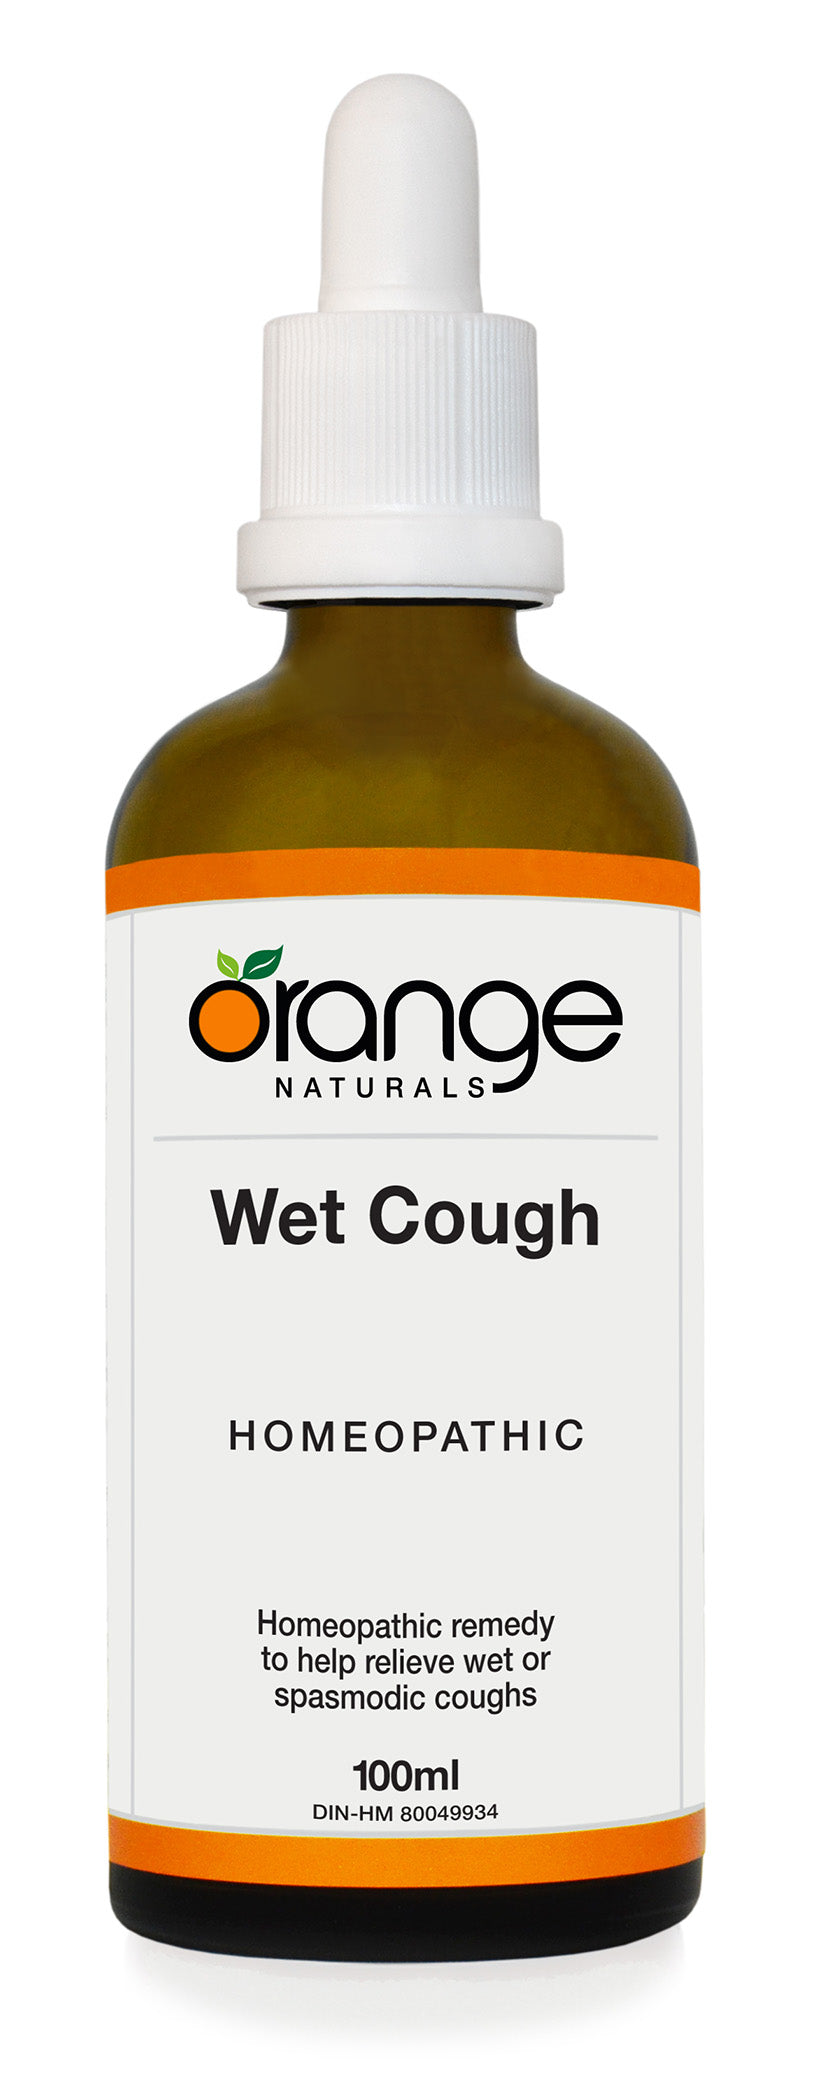 Wet Cough Homeopathic